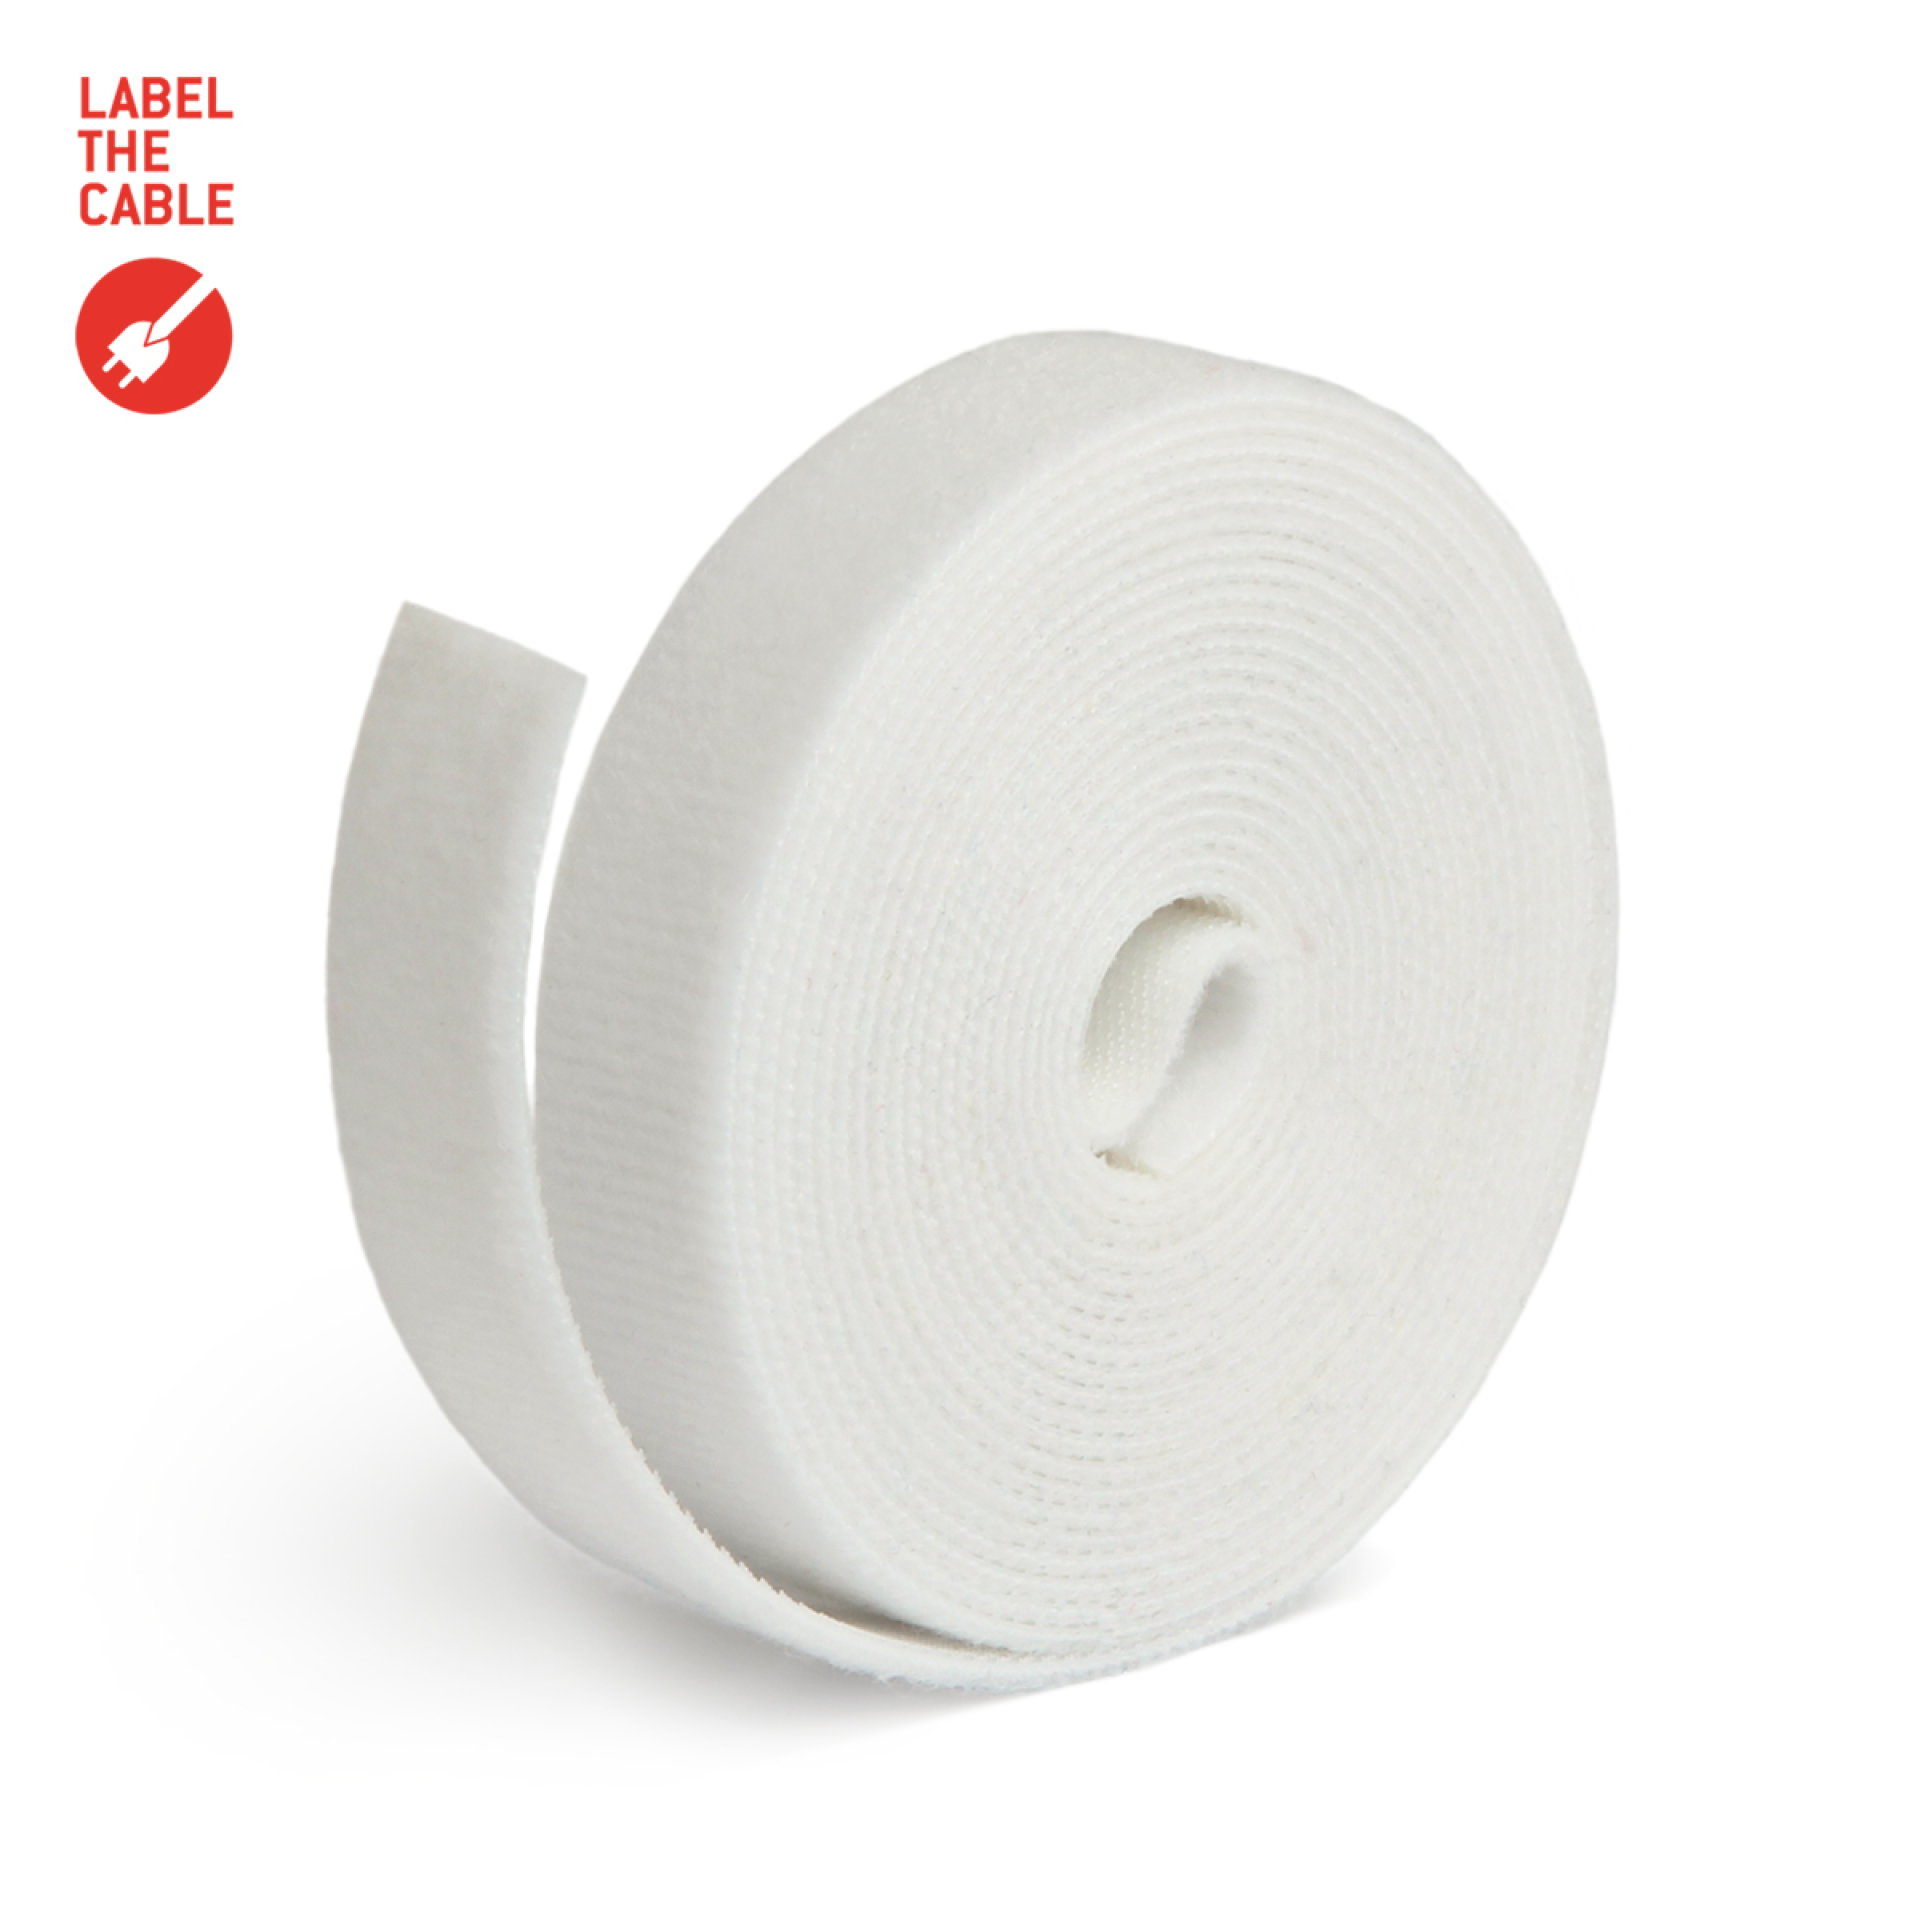 LTC ROLL STRAP, double sided hook and loop roll 3m white